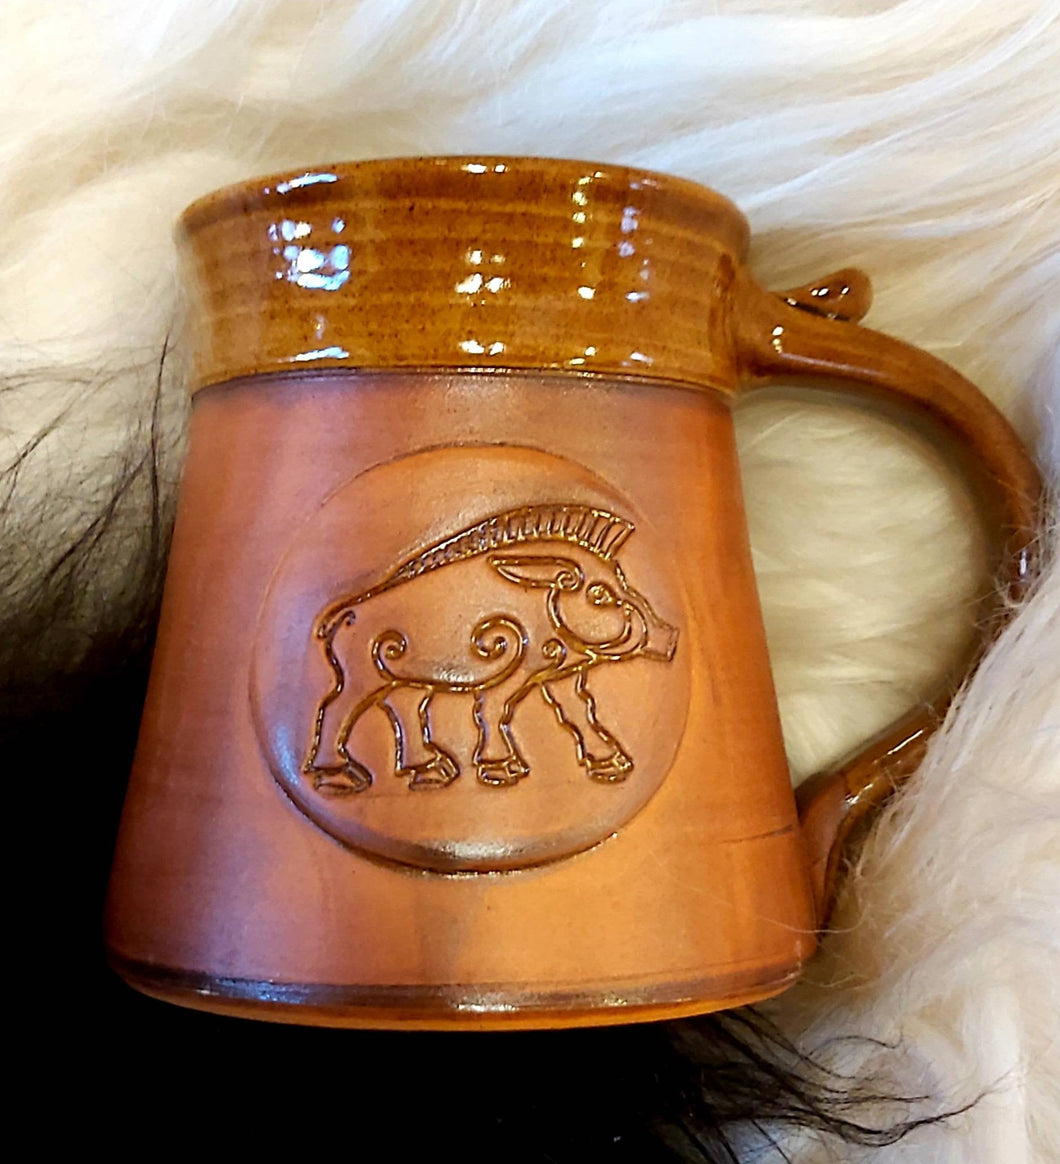 Viking Mug Wild Boar Tankard 20oz Handmade Ceramic Pottery Beer Cider Coffee Cup Anniversary Special Present Collectible Unique Gift - Arts and Beauty Ltd